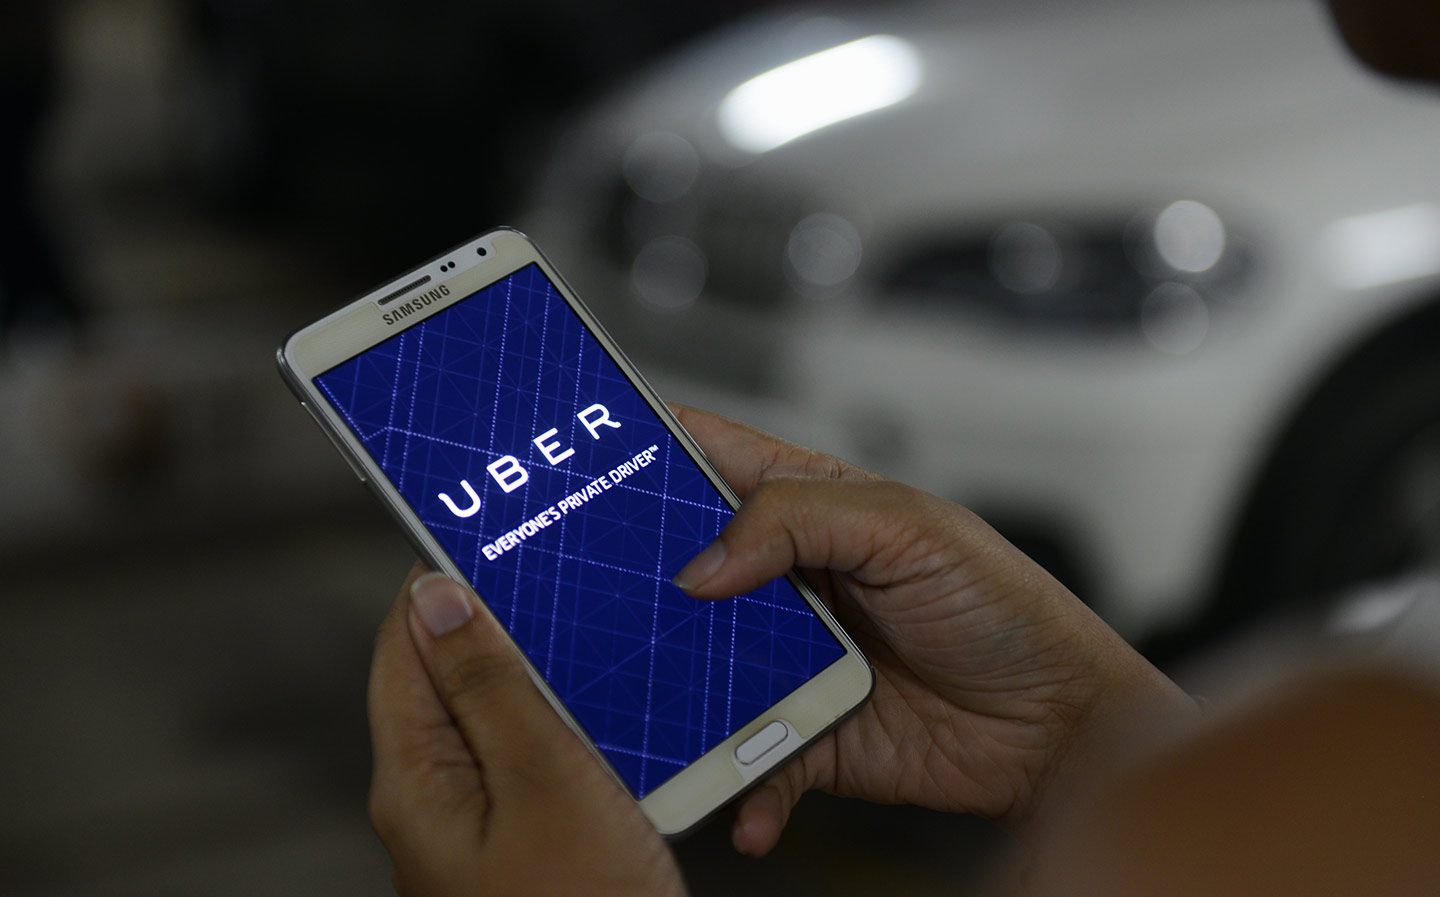 Uber drivers accused of boosting fares by selling passengers drugs